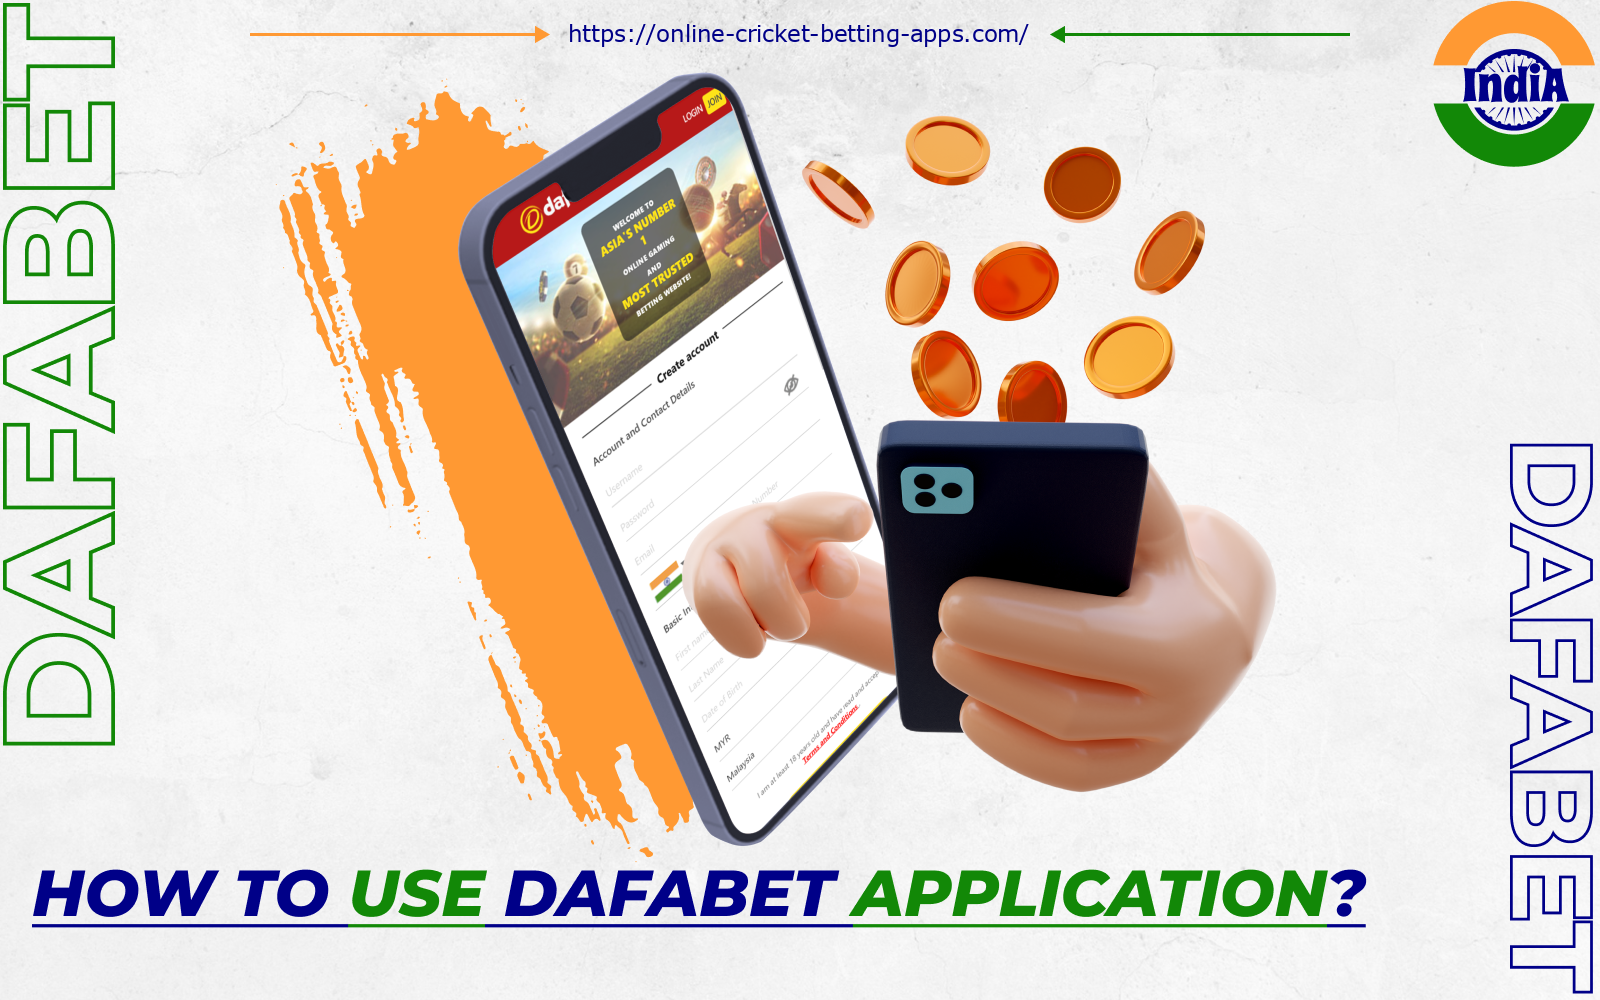 Any Indian user above 18 years of age can start using the Dafabet gambling app after registering and making a deposit